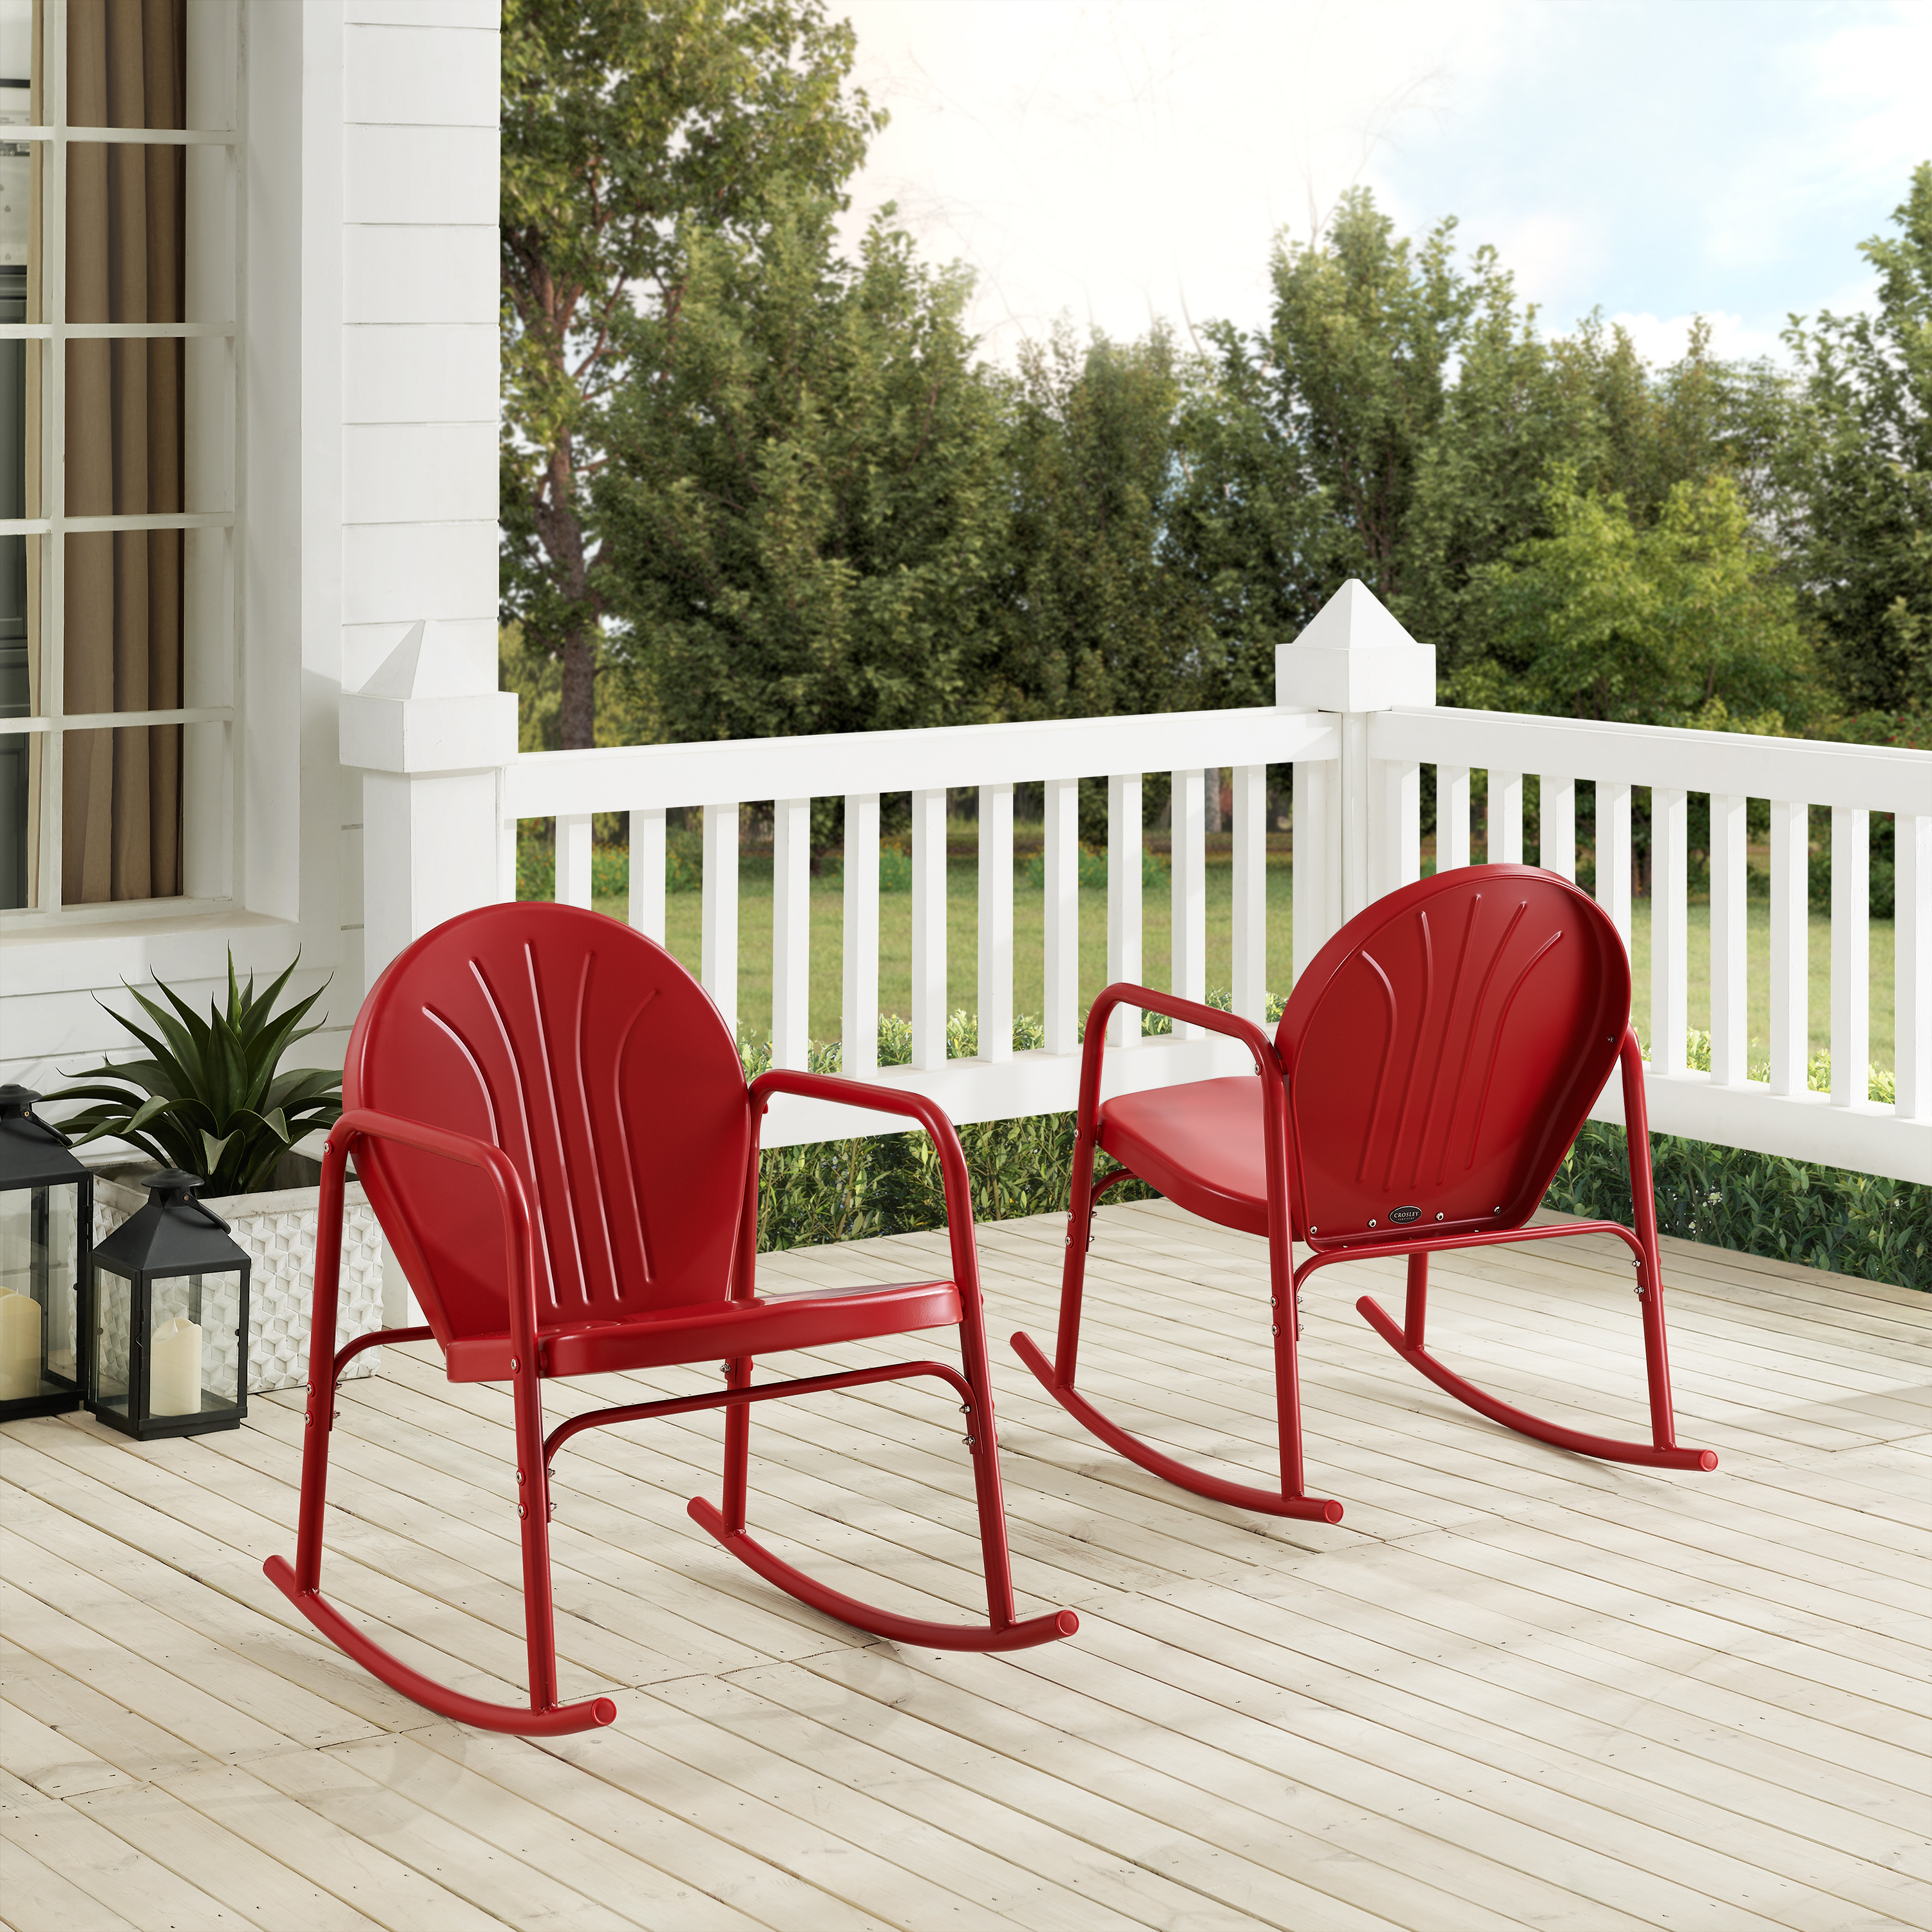 Crosley Furniture Griffith Metal Rocking Chair in Bright Red Gloss (Set of 2) - image 3 of 13